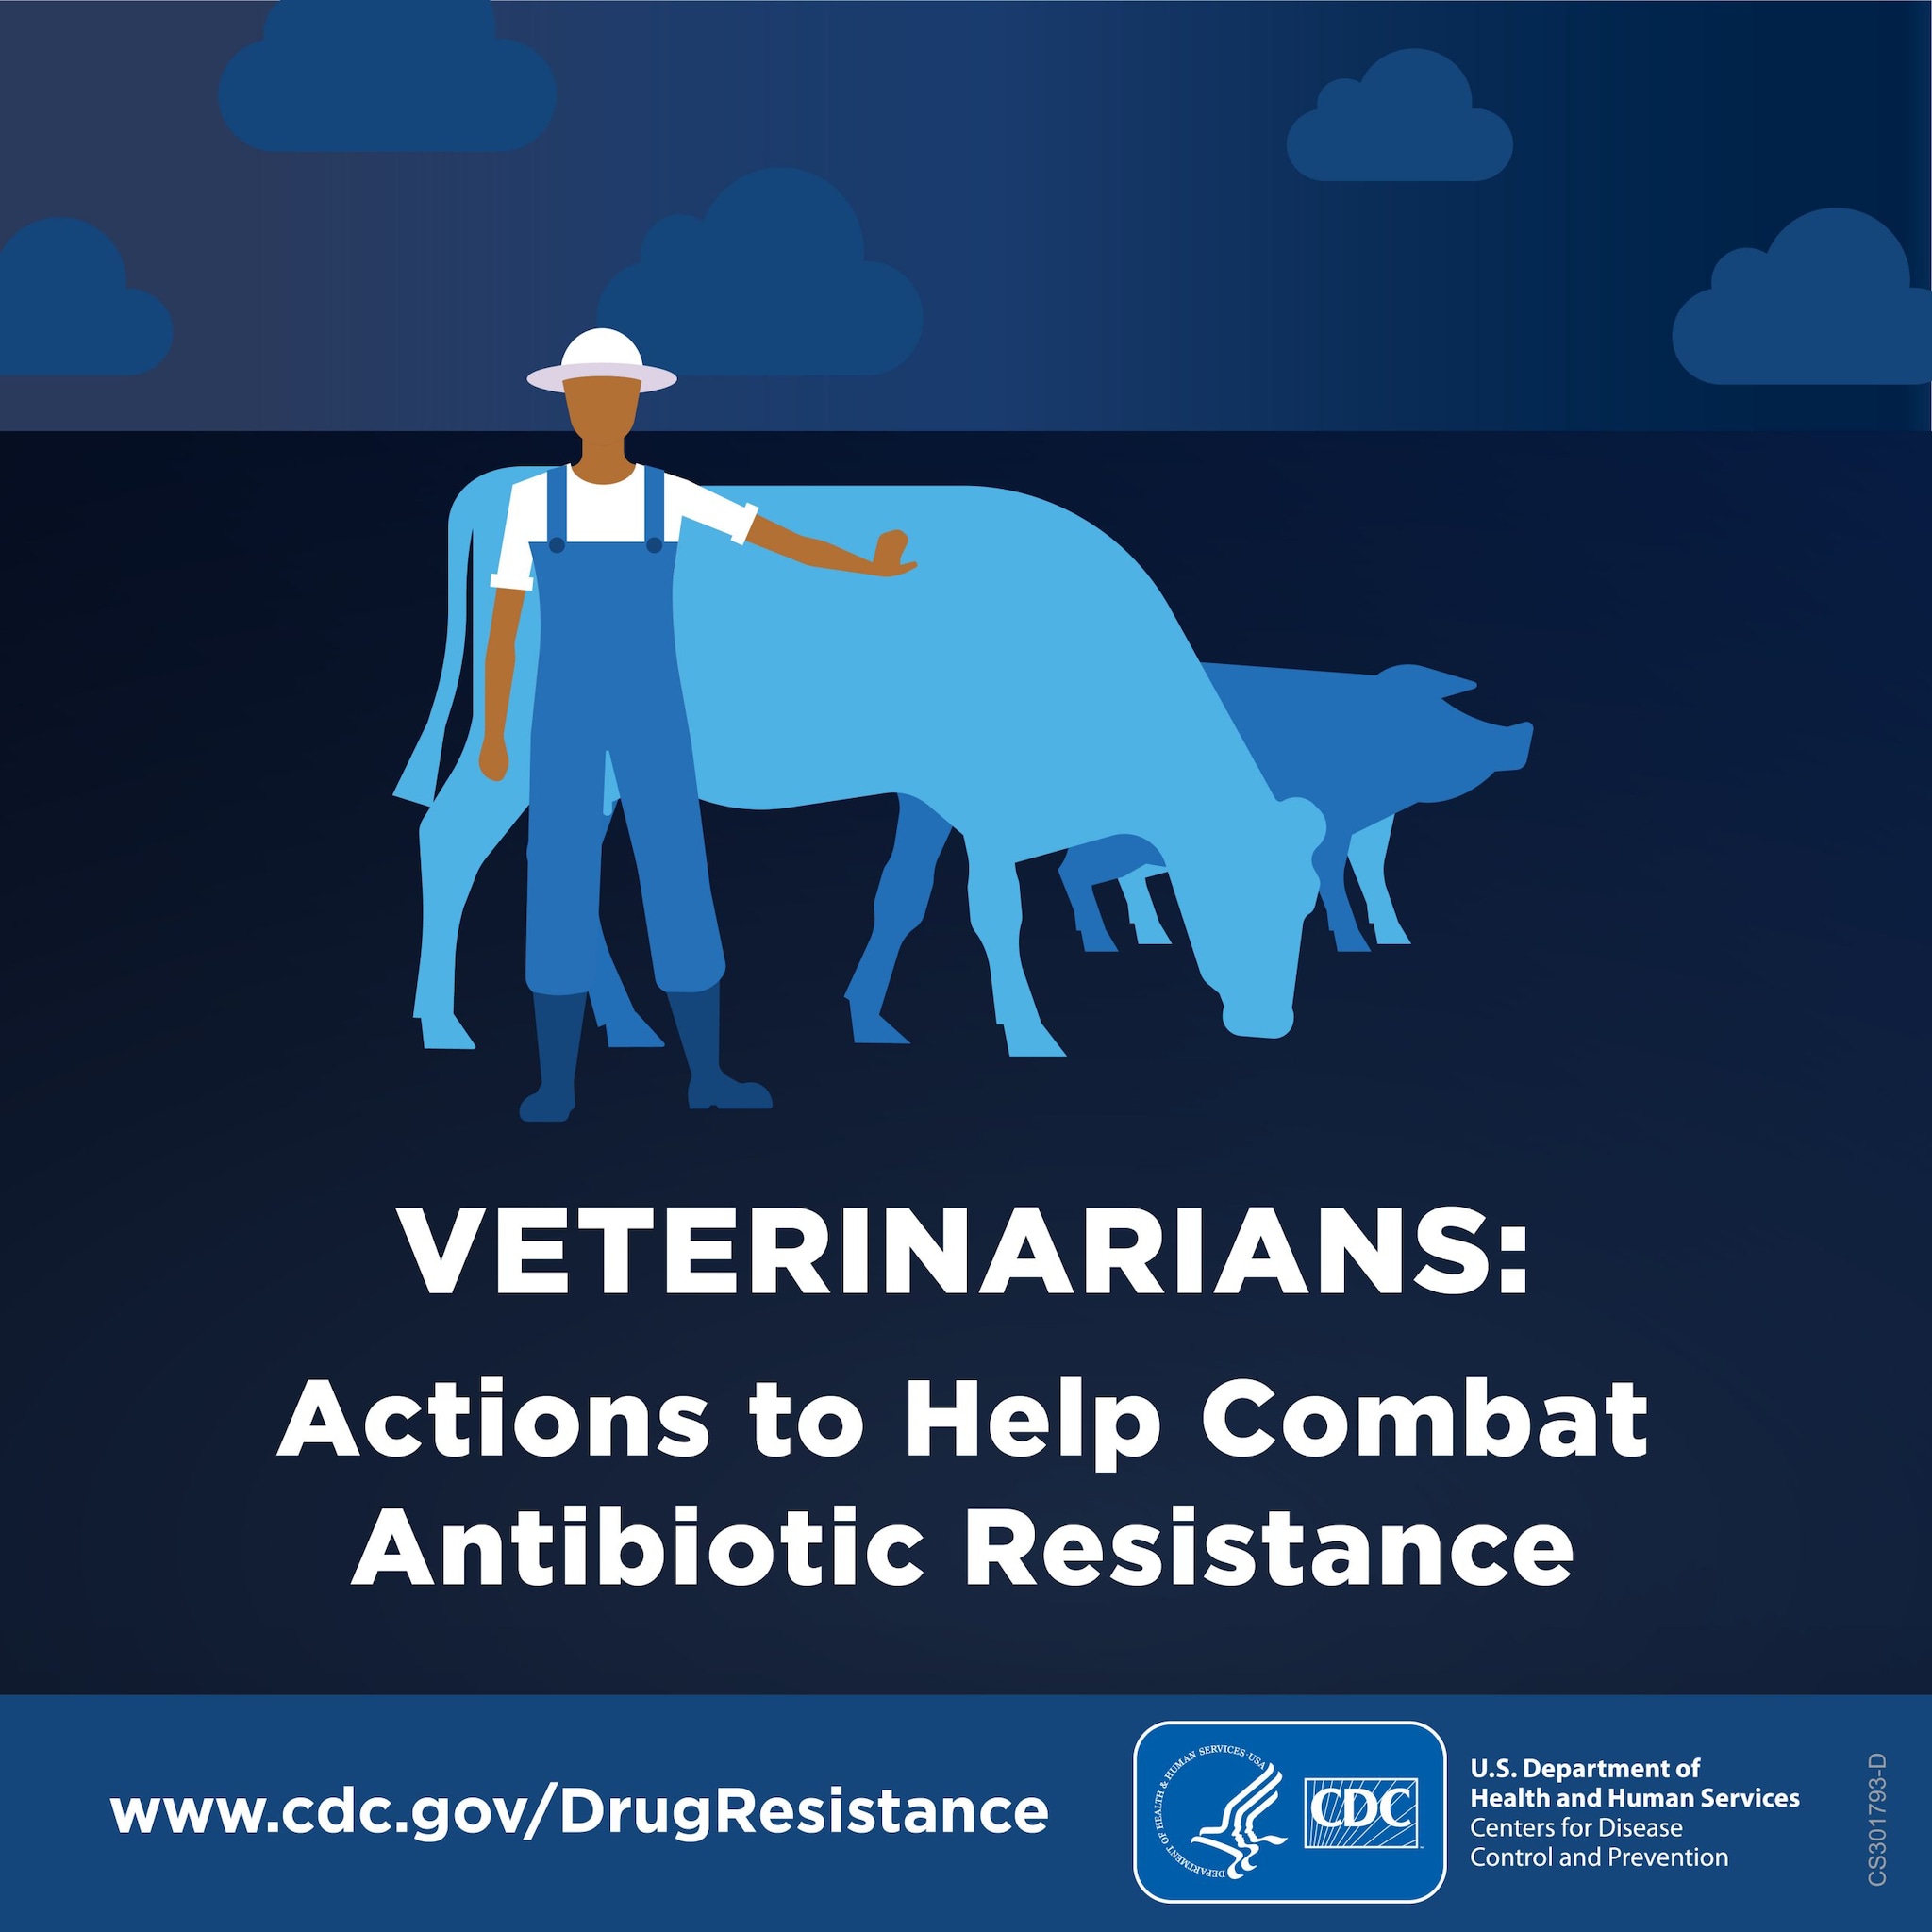 Commit to action, deliver results, combat antibiotic resistance.